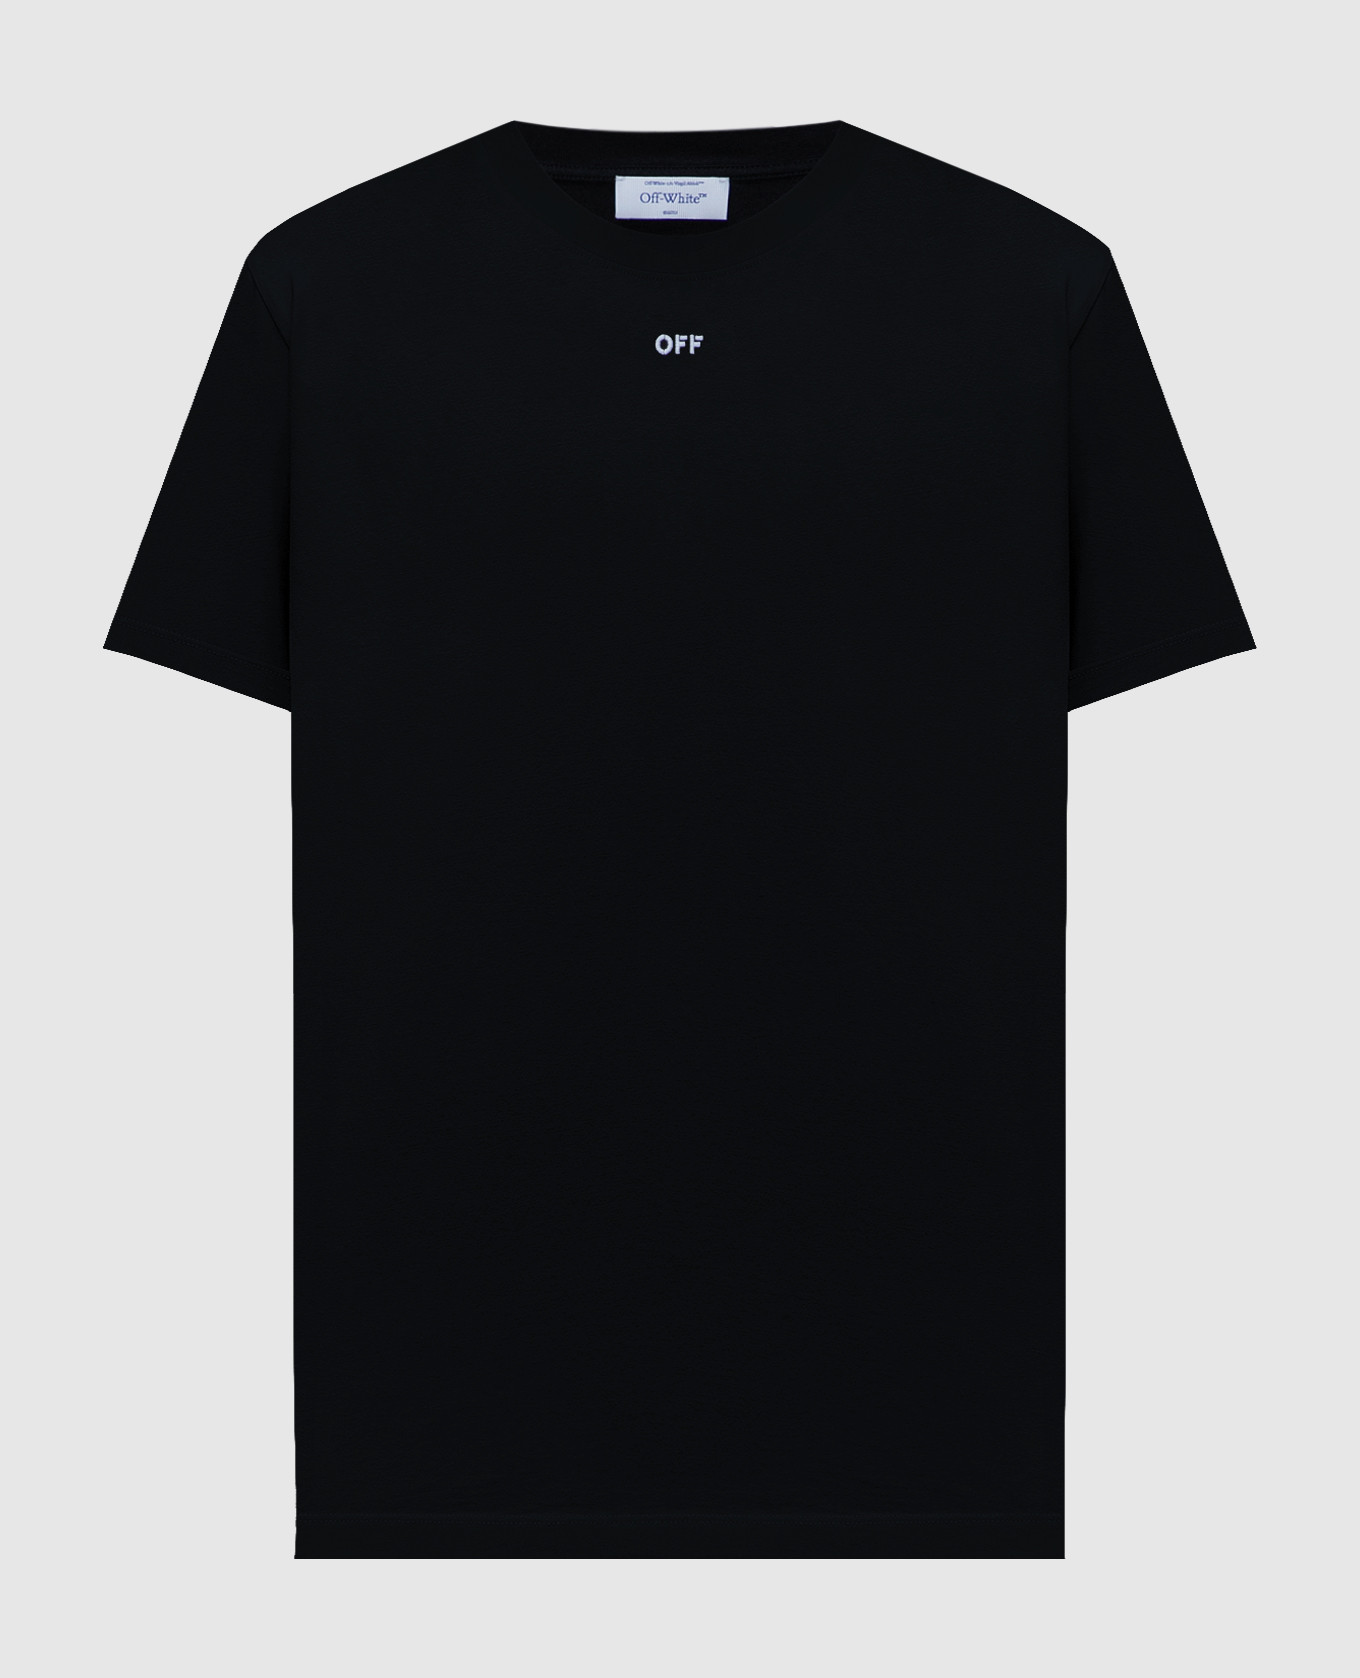 Black t-shirt with Arrow embroidery